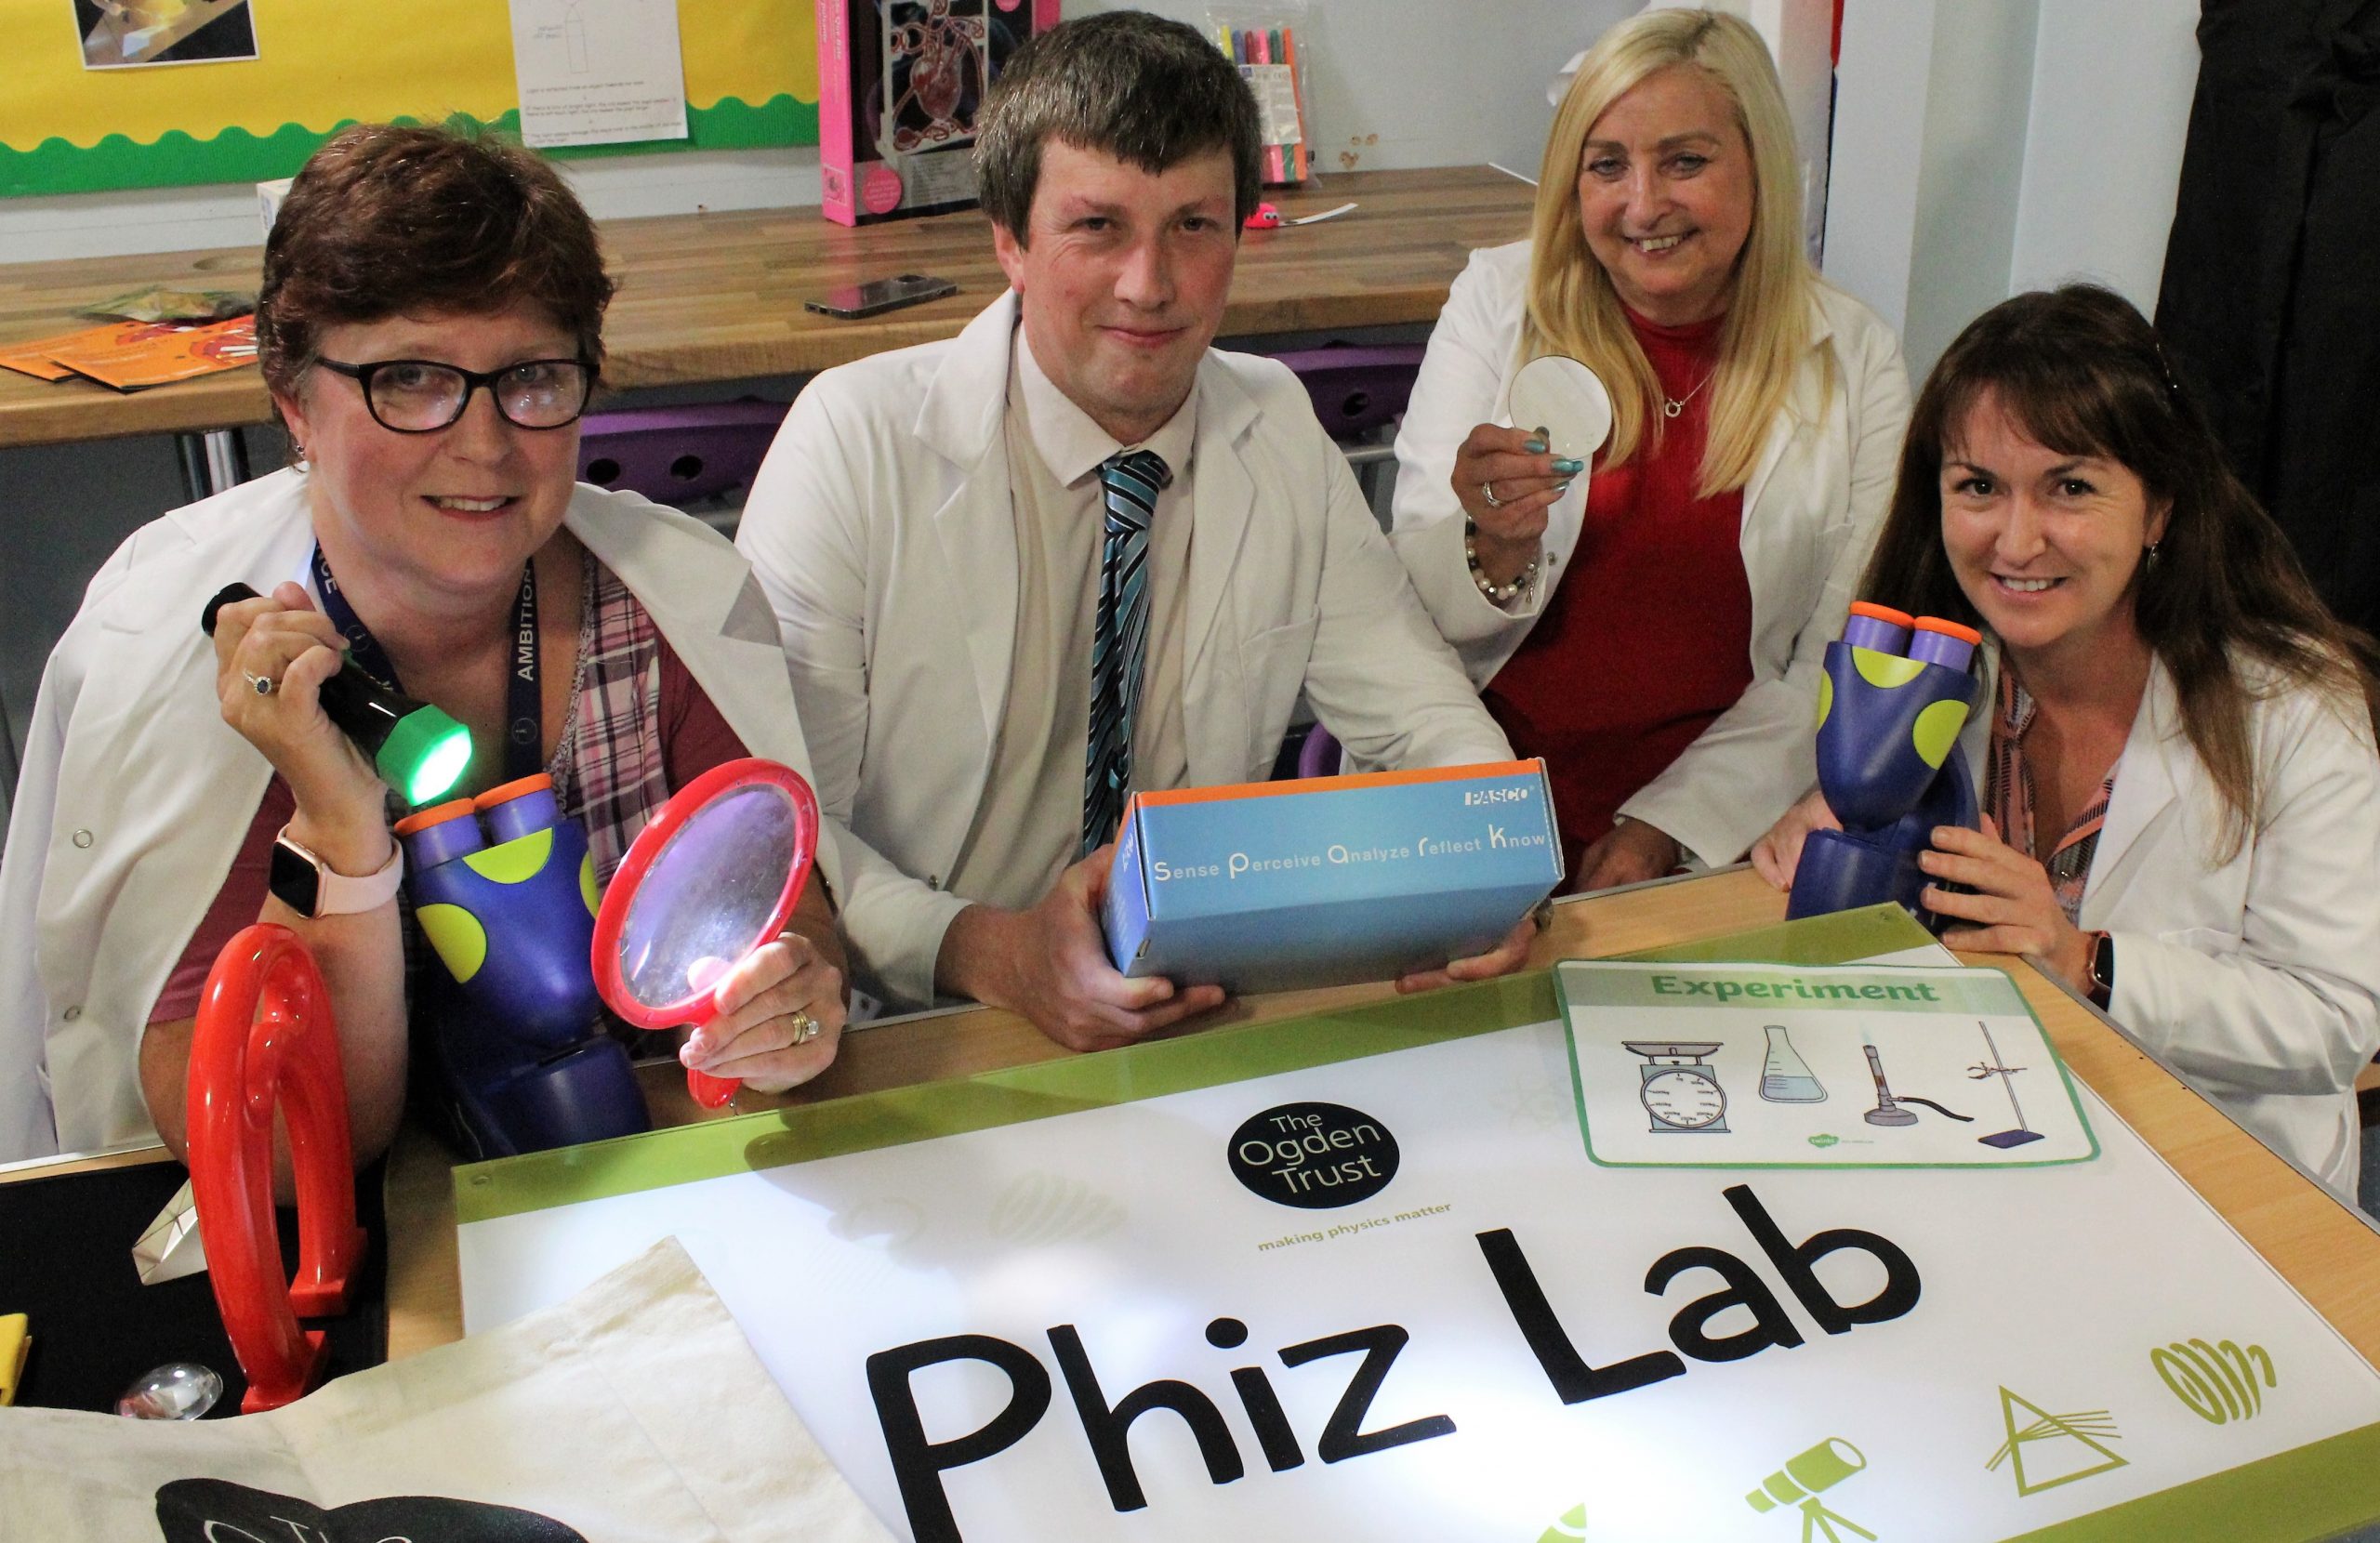 A photo from the Phiz Lab opening - seated around the Phiz Lab sign which is on a table